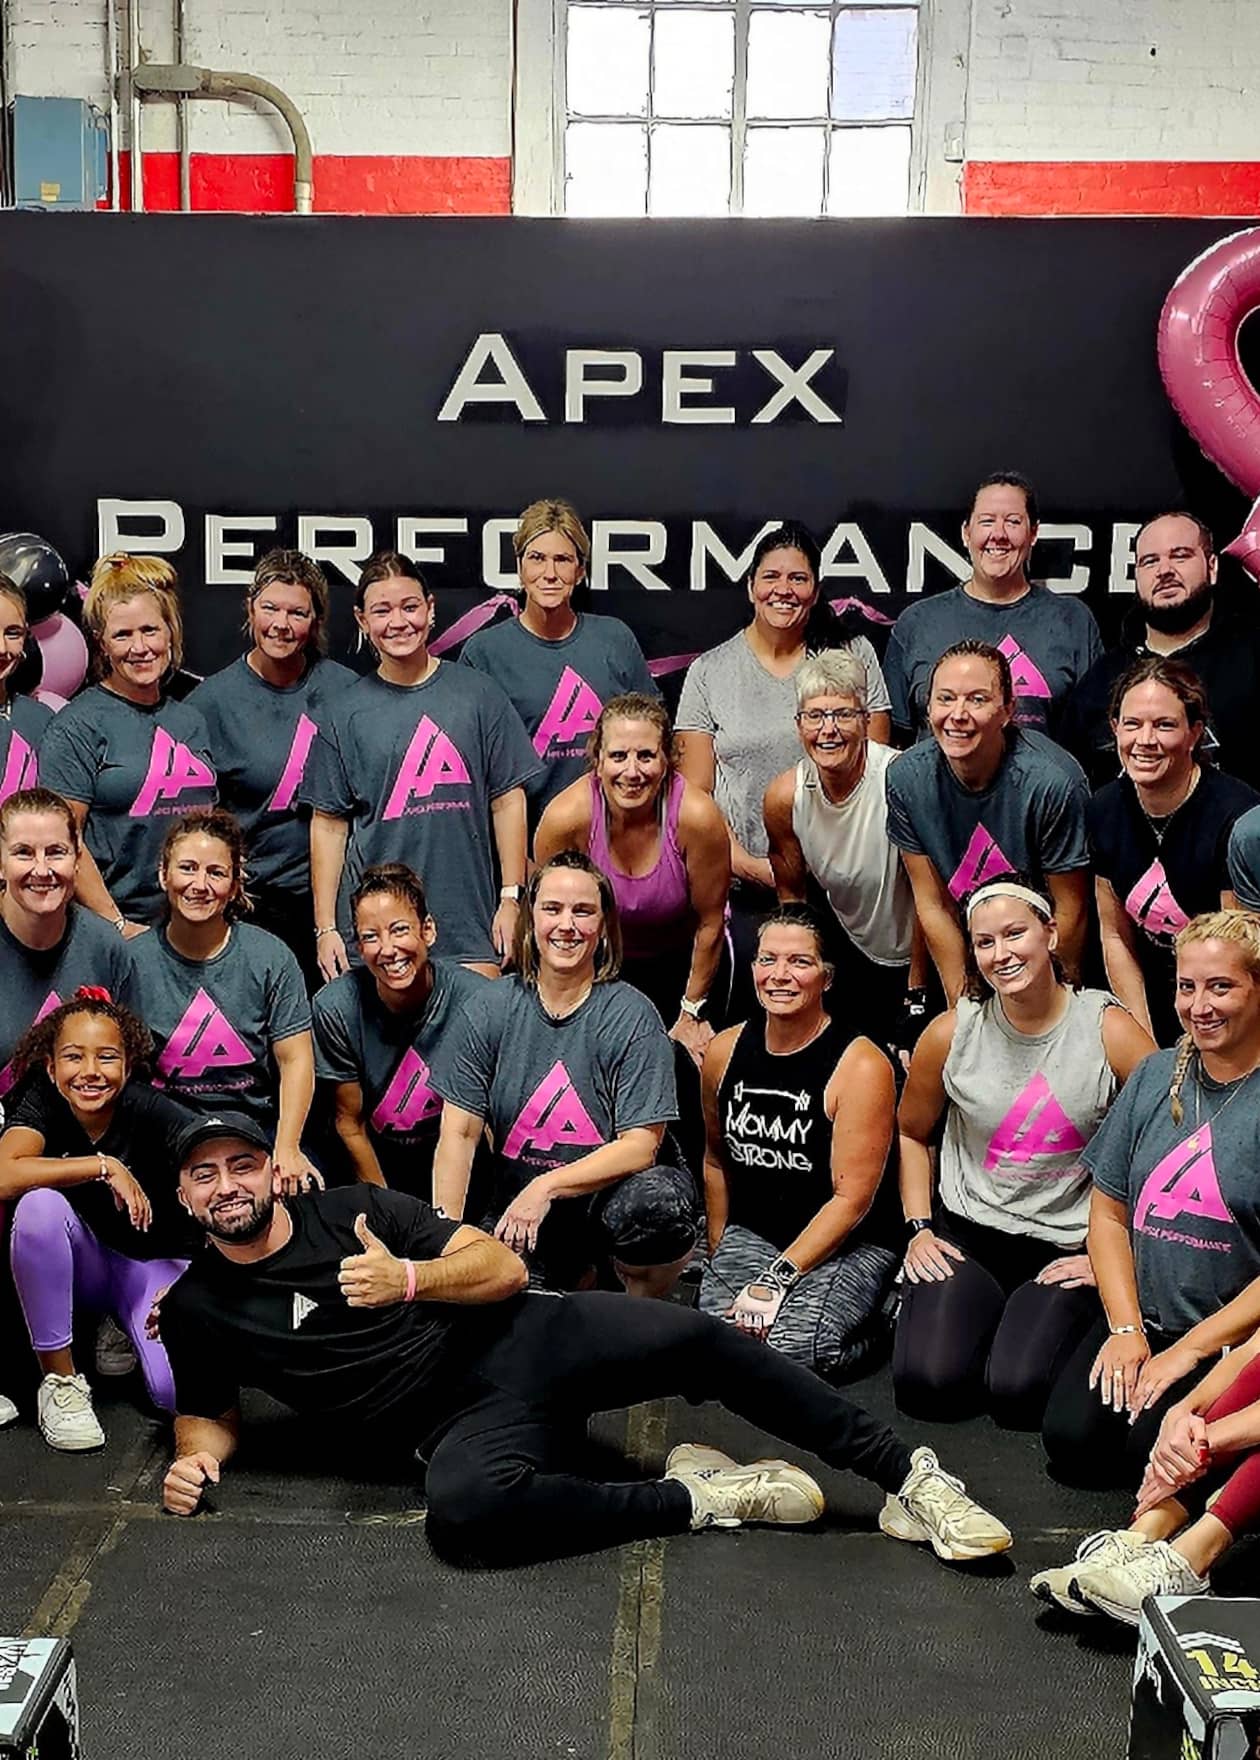 Apex Performance Gym members staff in pink t-shirts celebrating the barbells for cancer event.